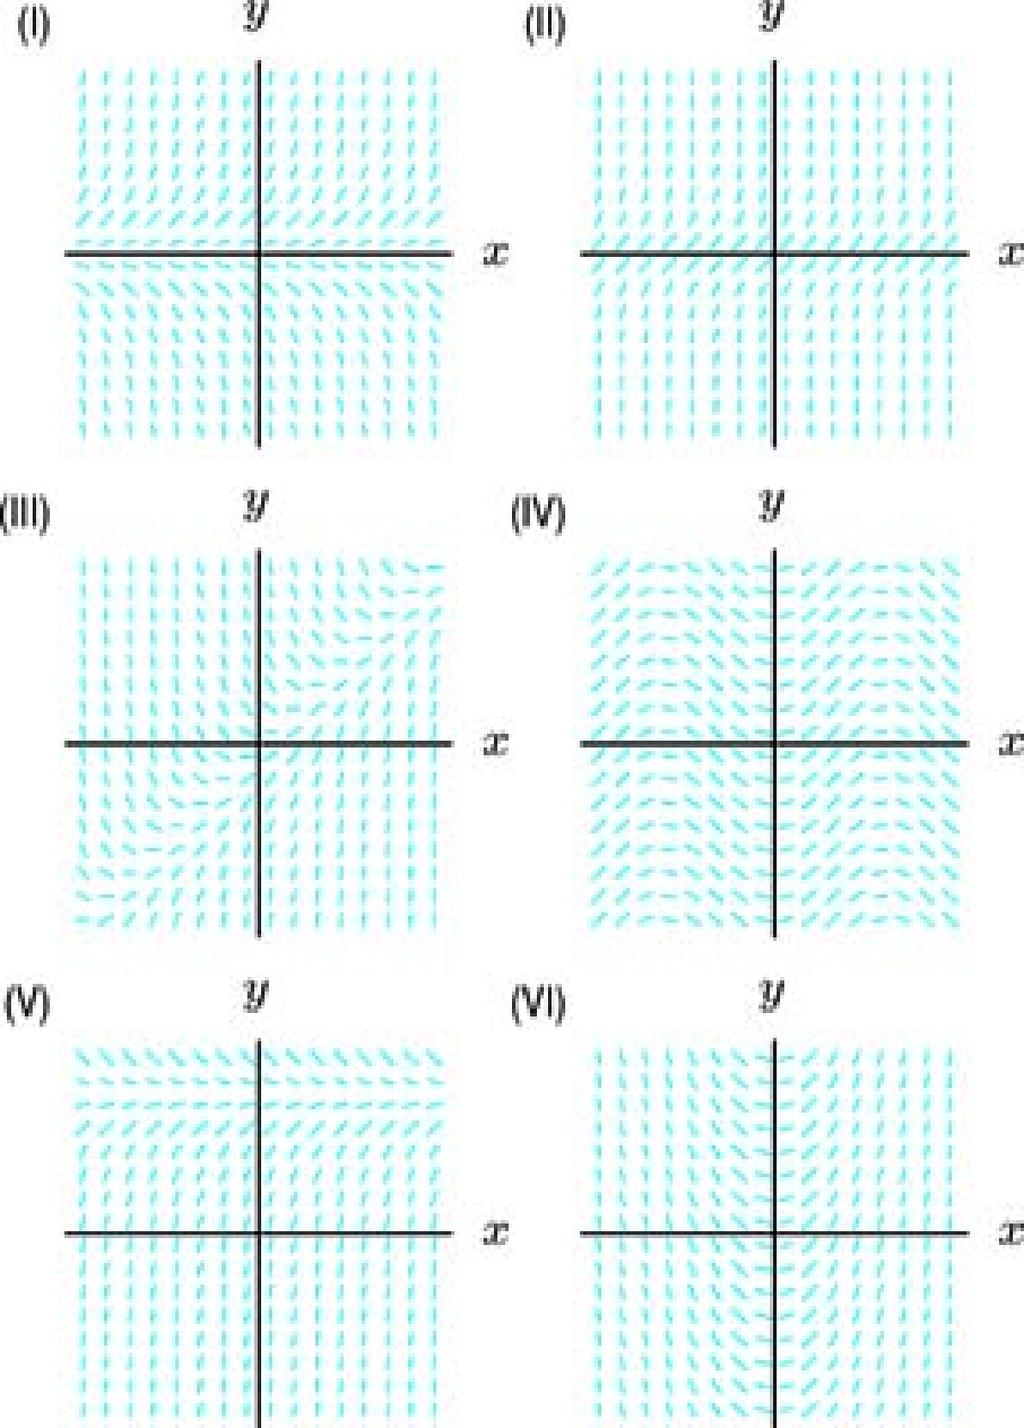 0. Match the slope fields shown below with their differential equations: (a) y = 1 + y (b) y = x (c) y = sin x (d) y = y (e) y = x y (f) y = 4 y (a) - (II). Slopes are positive everywhere.